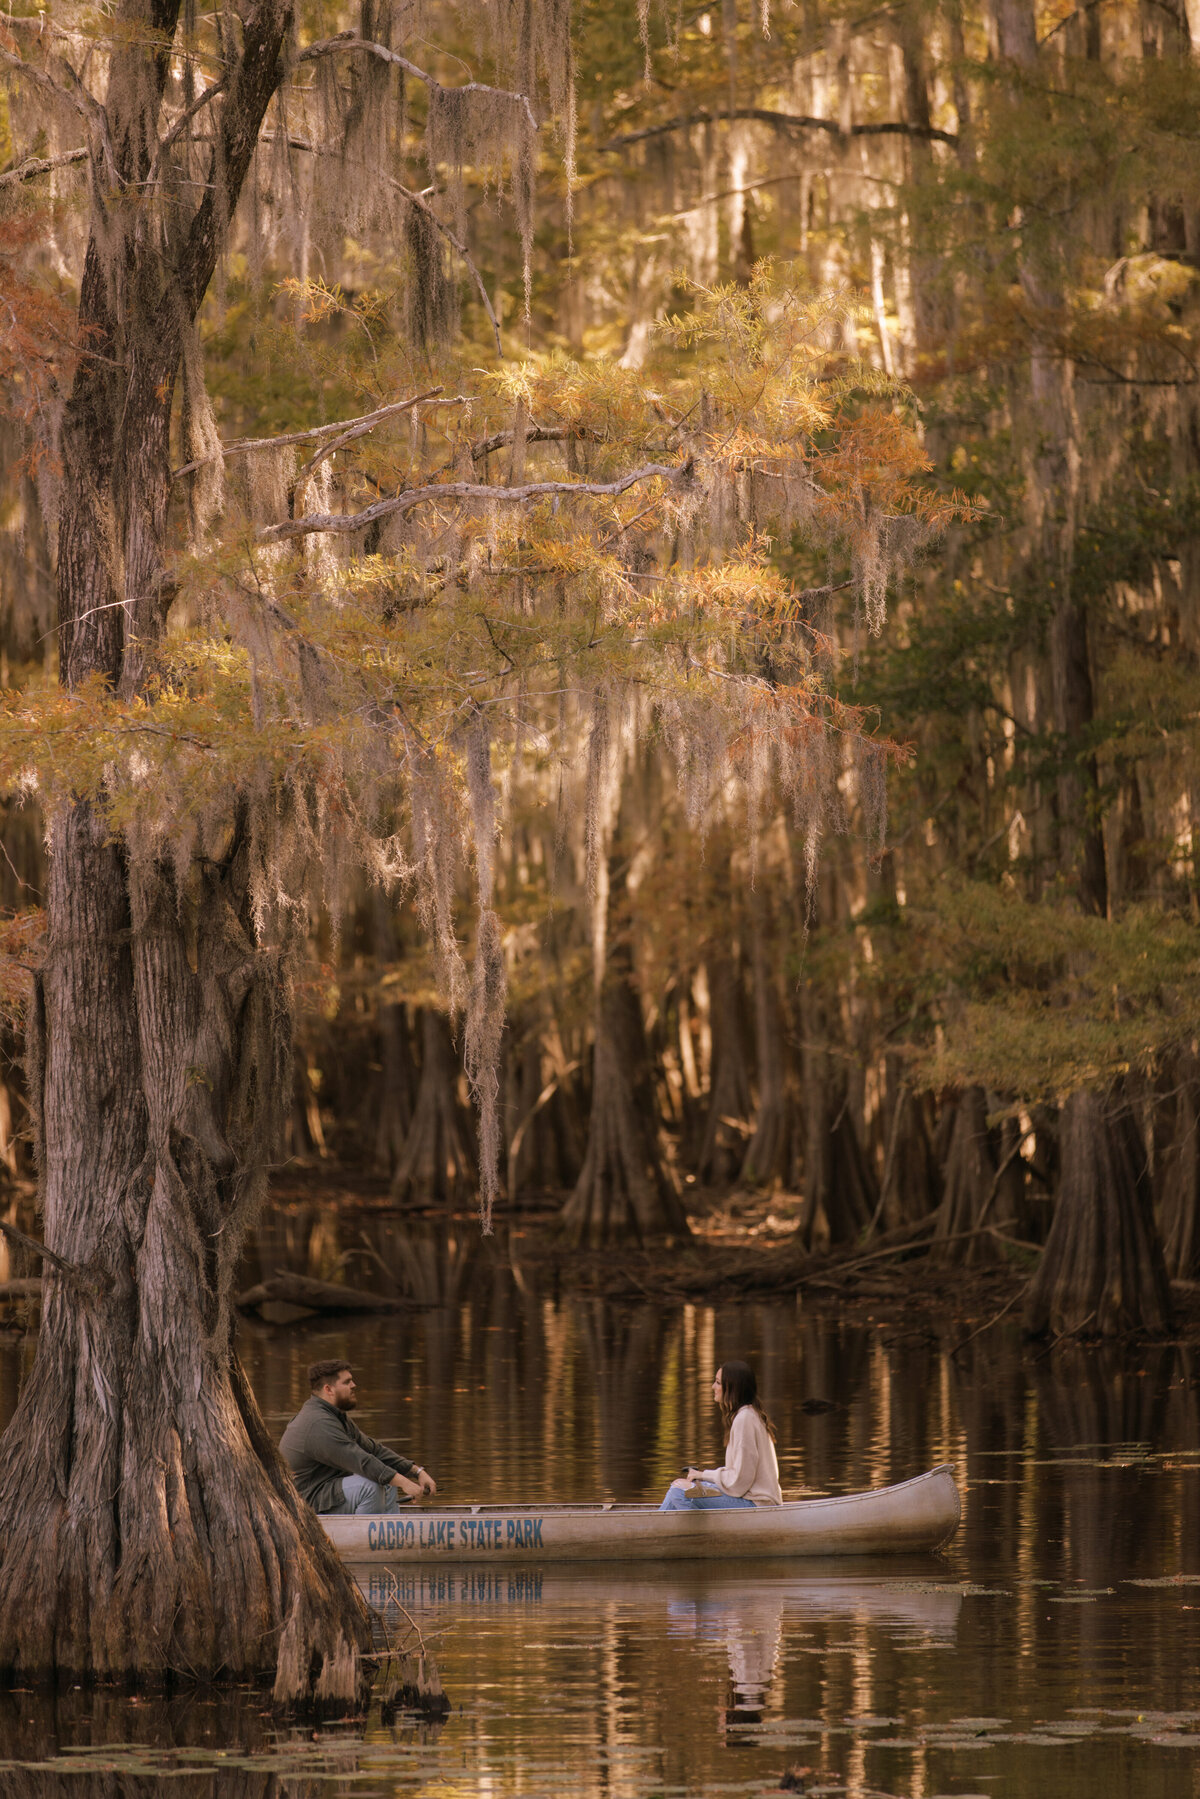 The Deep in the Heart Retreat | Carleigh + Wyatt's Canoe Engagement Session at Caddo Lake State Park | Alison Faith Photography-3380